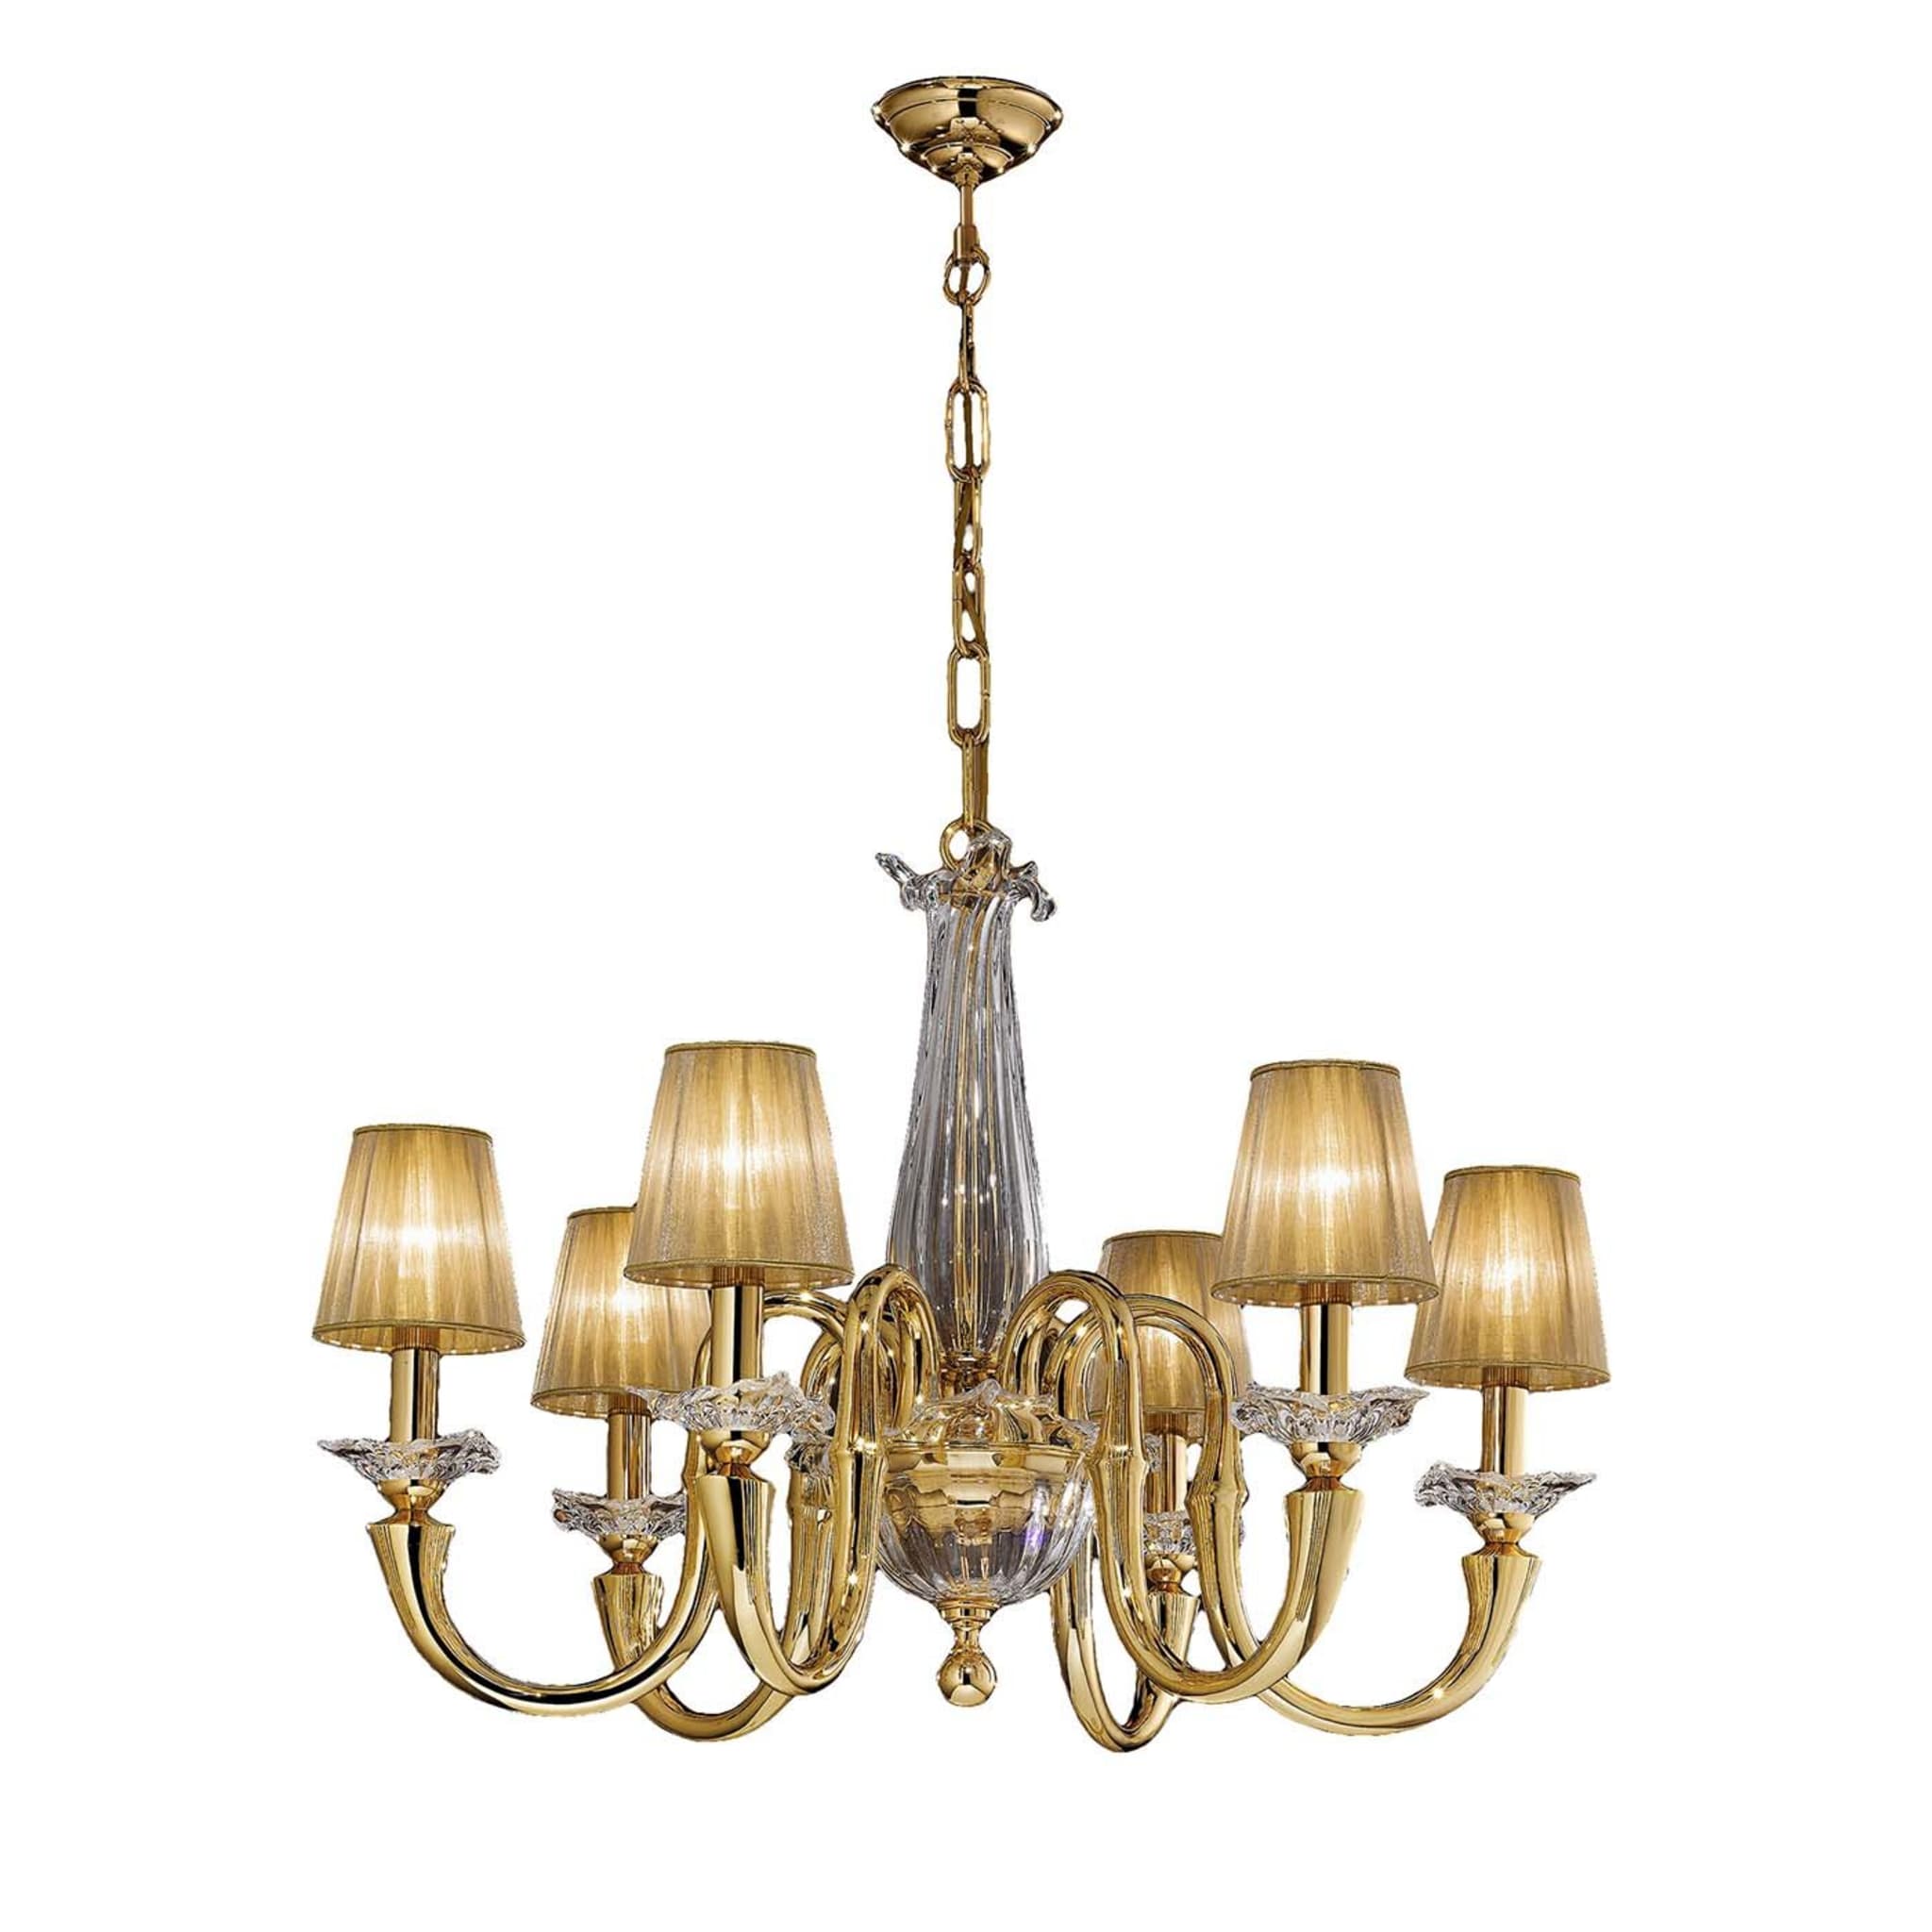 Gold and Crystal 6-Light Chandelier with Organza Shades - Main view